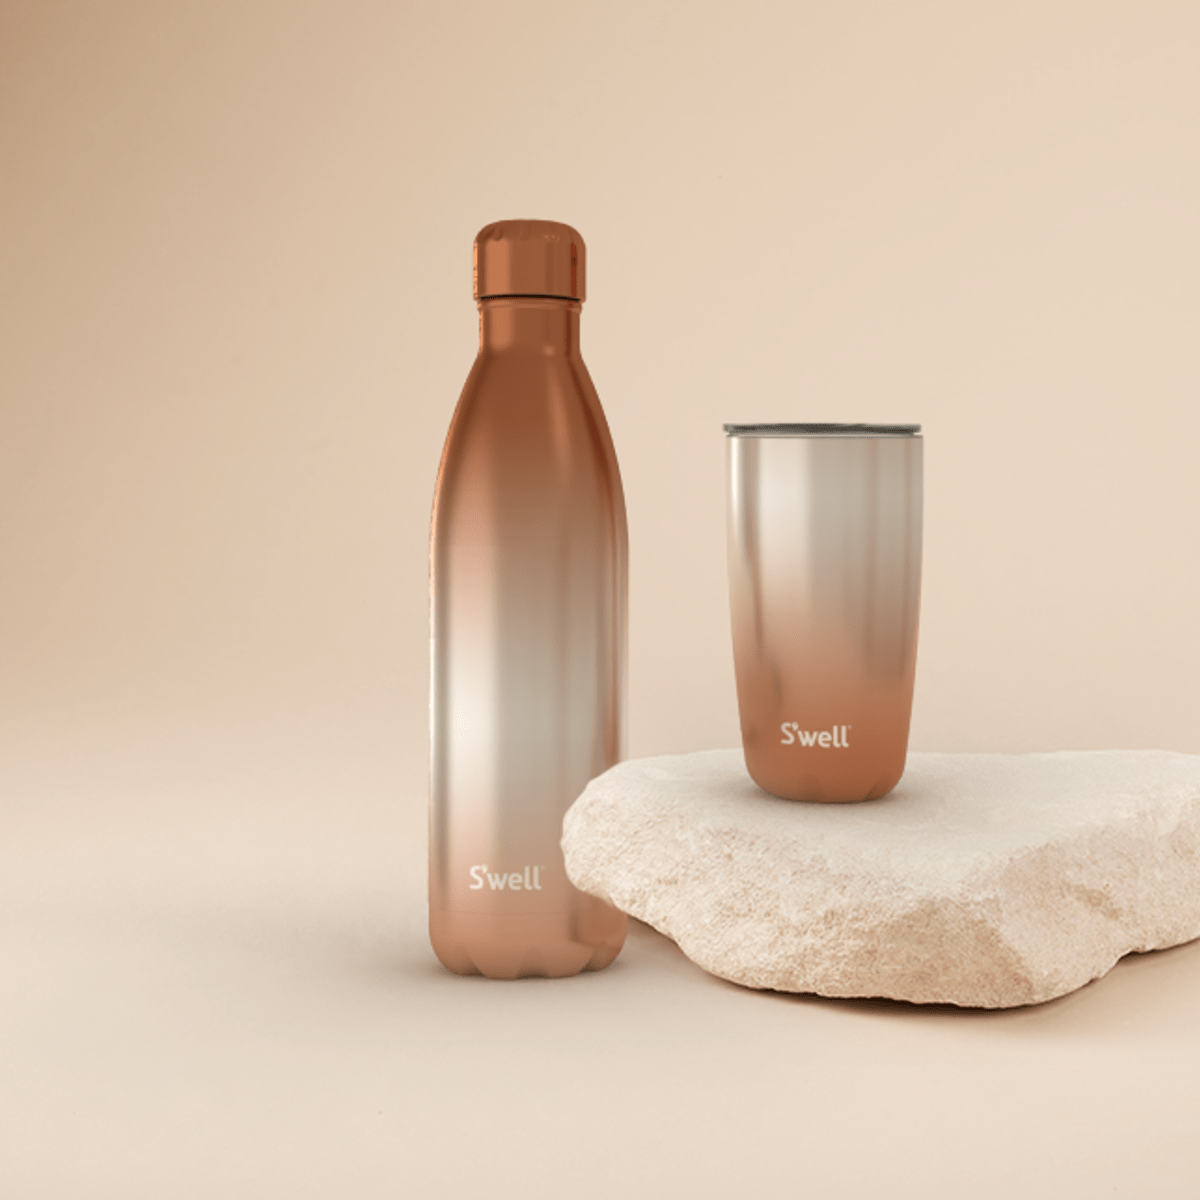 Lifetime Brands Acquires S'well Water Bottle Business